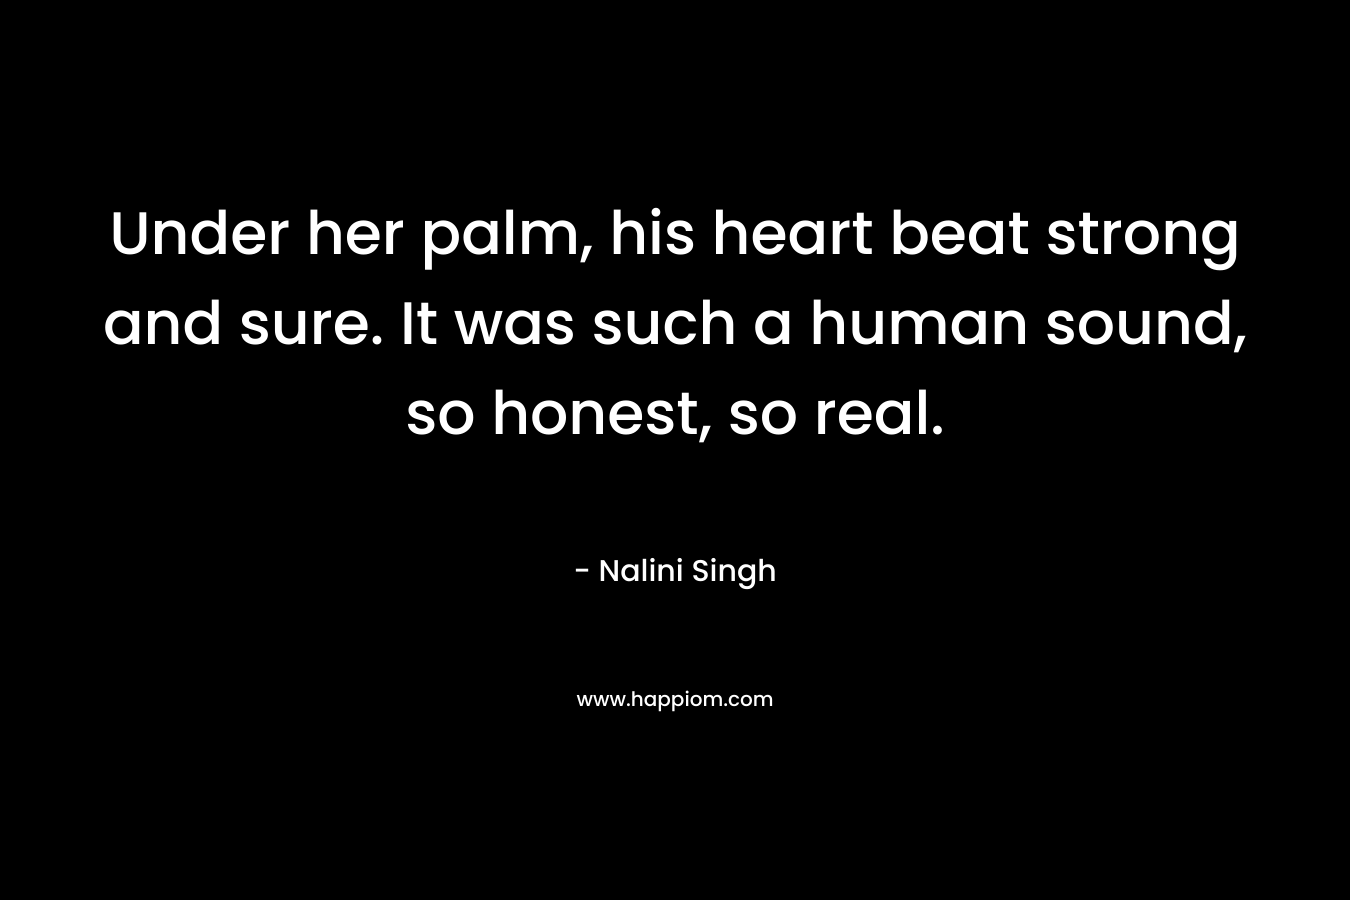 Under her palm, his heart beat strong and sure. It was such a human sound, so honest, so real.